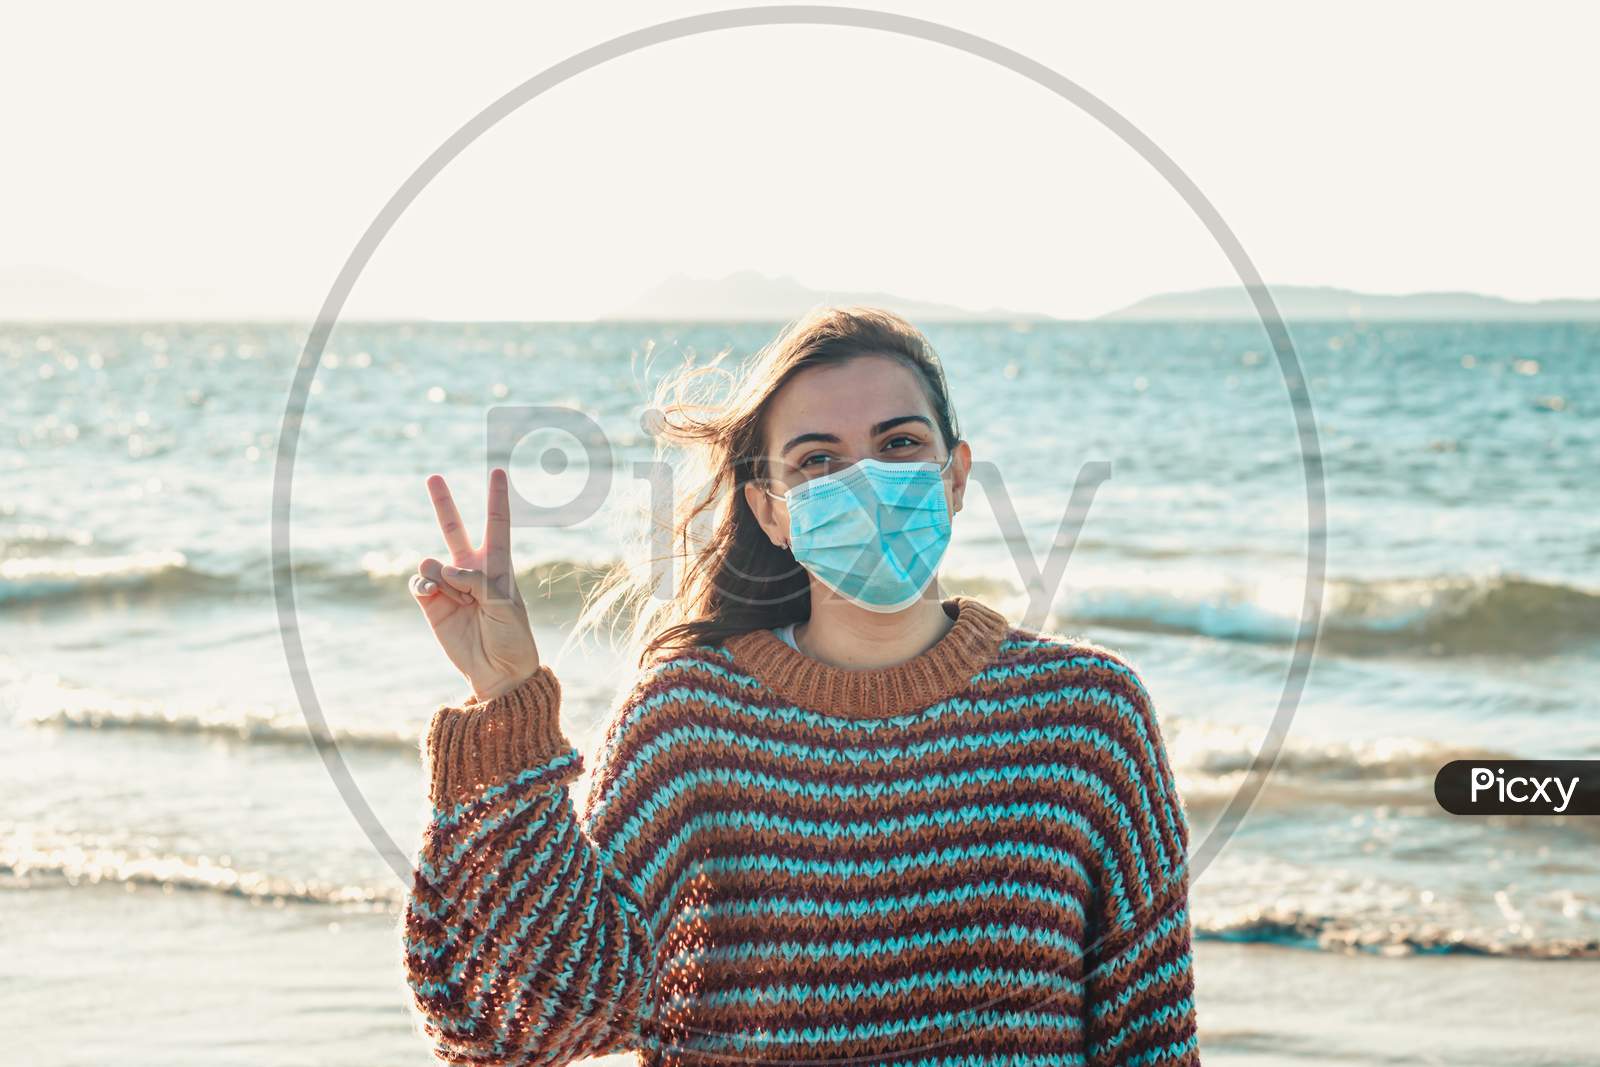 Young Woman On A Sweater On The Beach Using A Surgical Mask And Making The V Symbol During A Bright Day With An Island As The Background